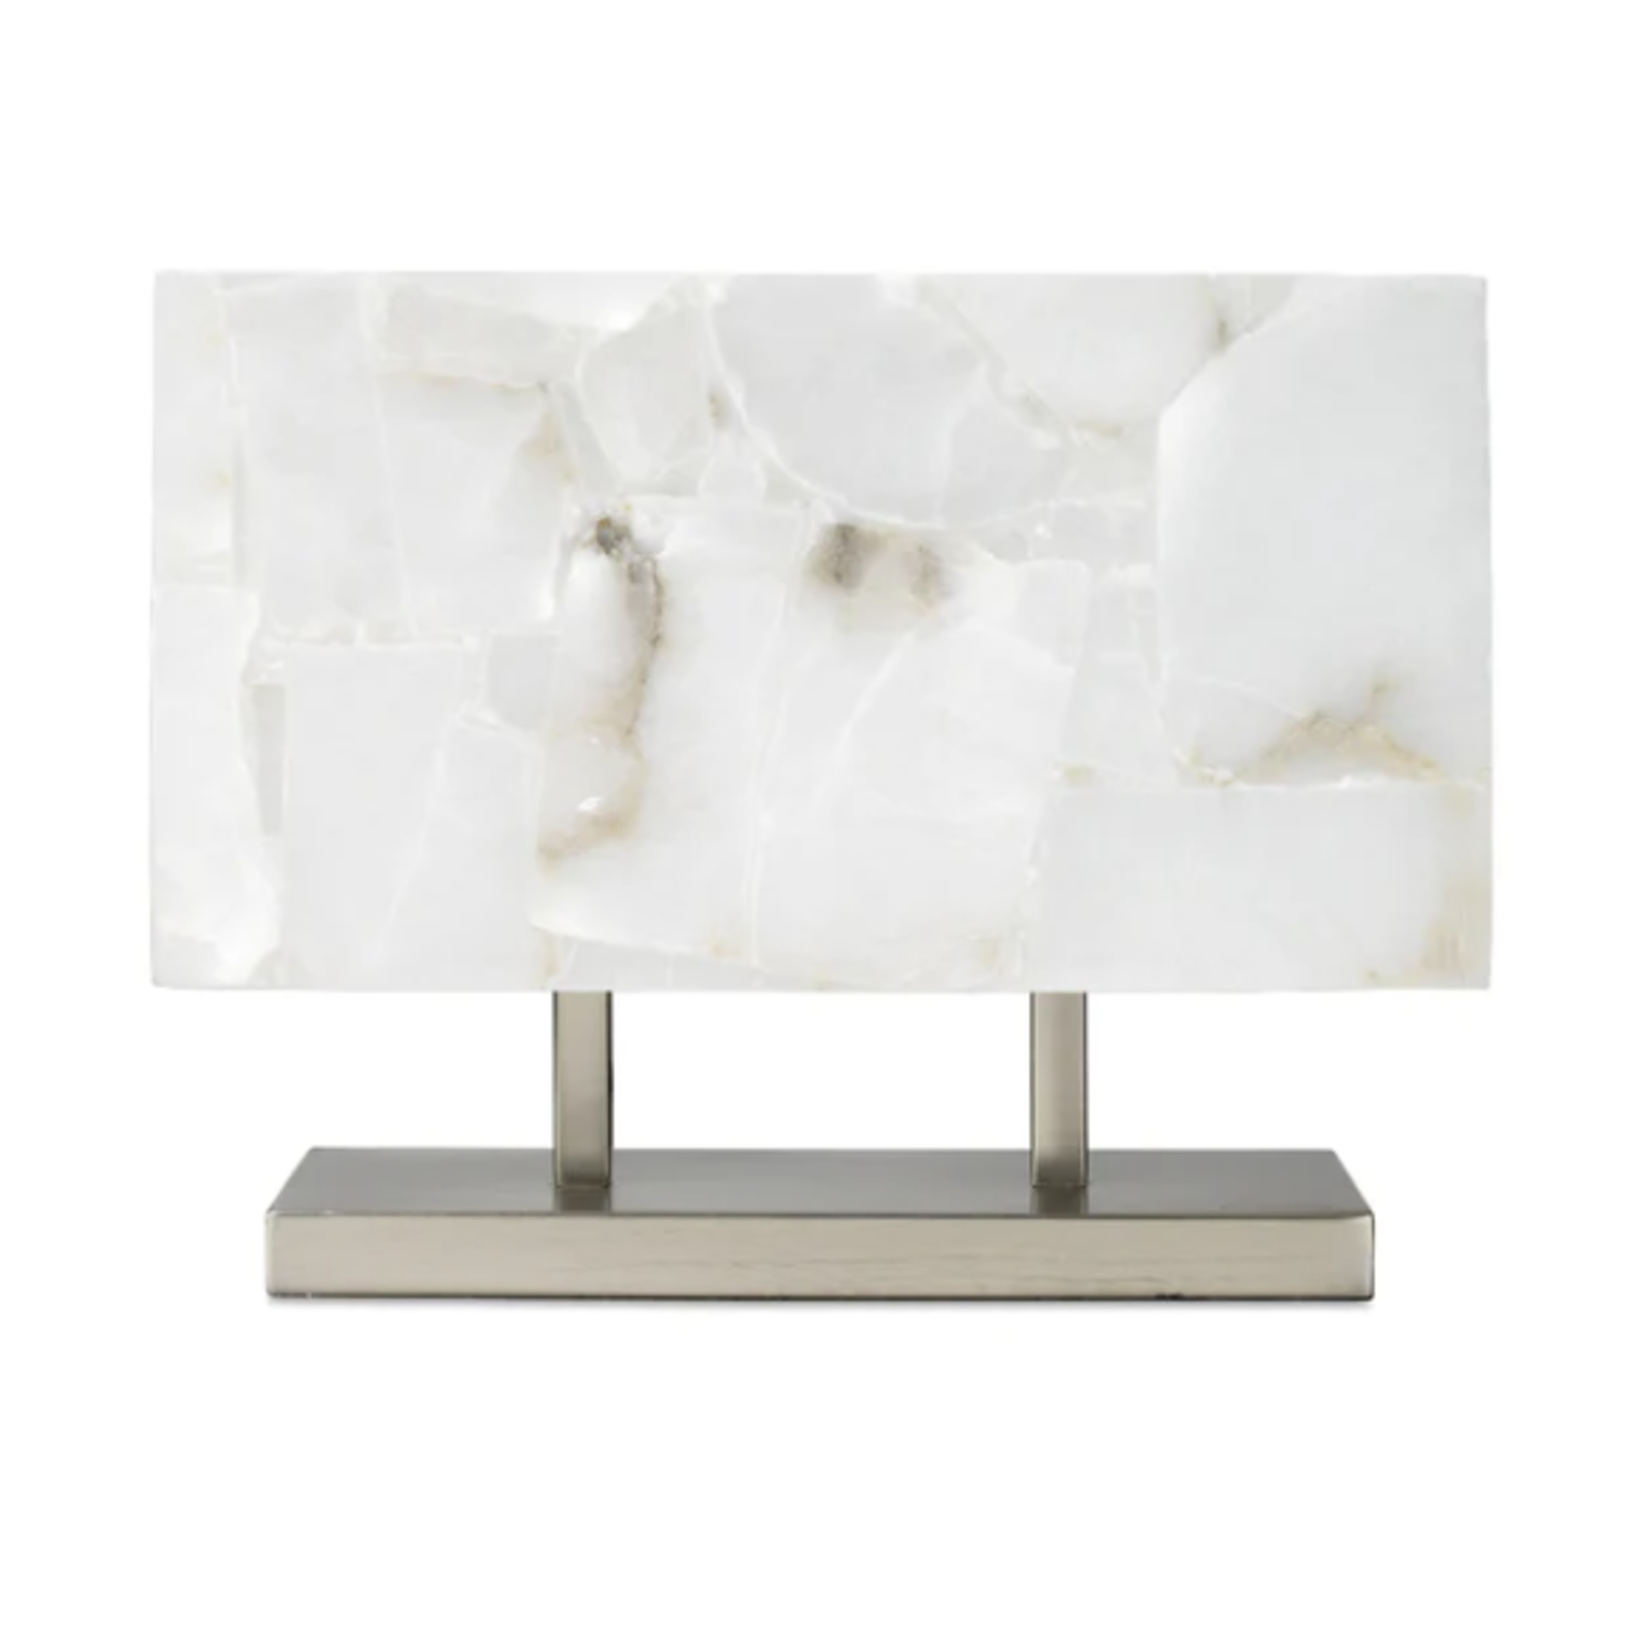 G3 Ghost Horizon Table Lamp, Antique Silver Base